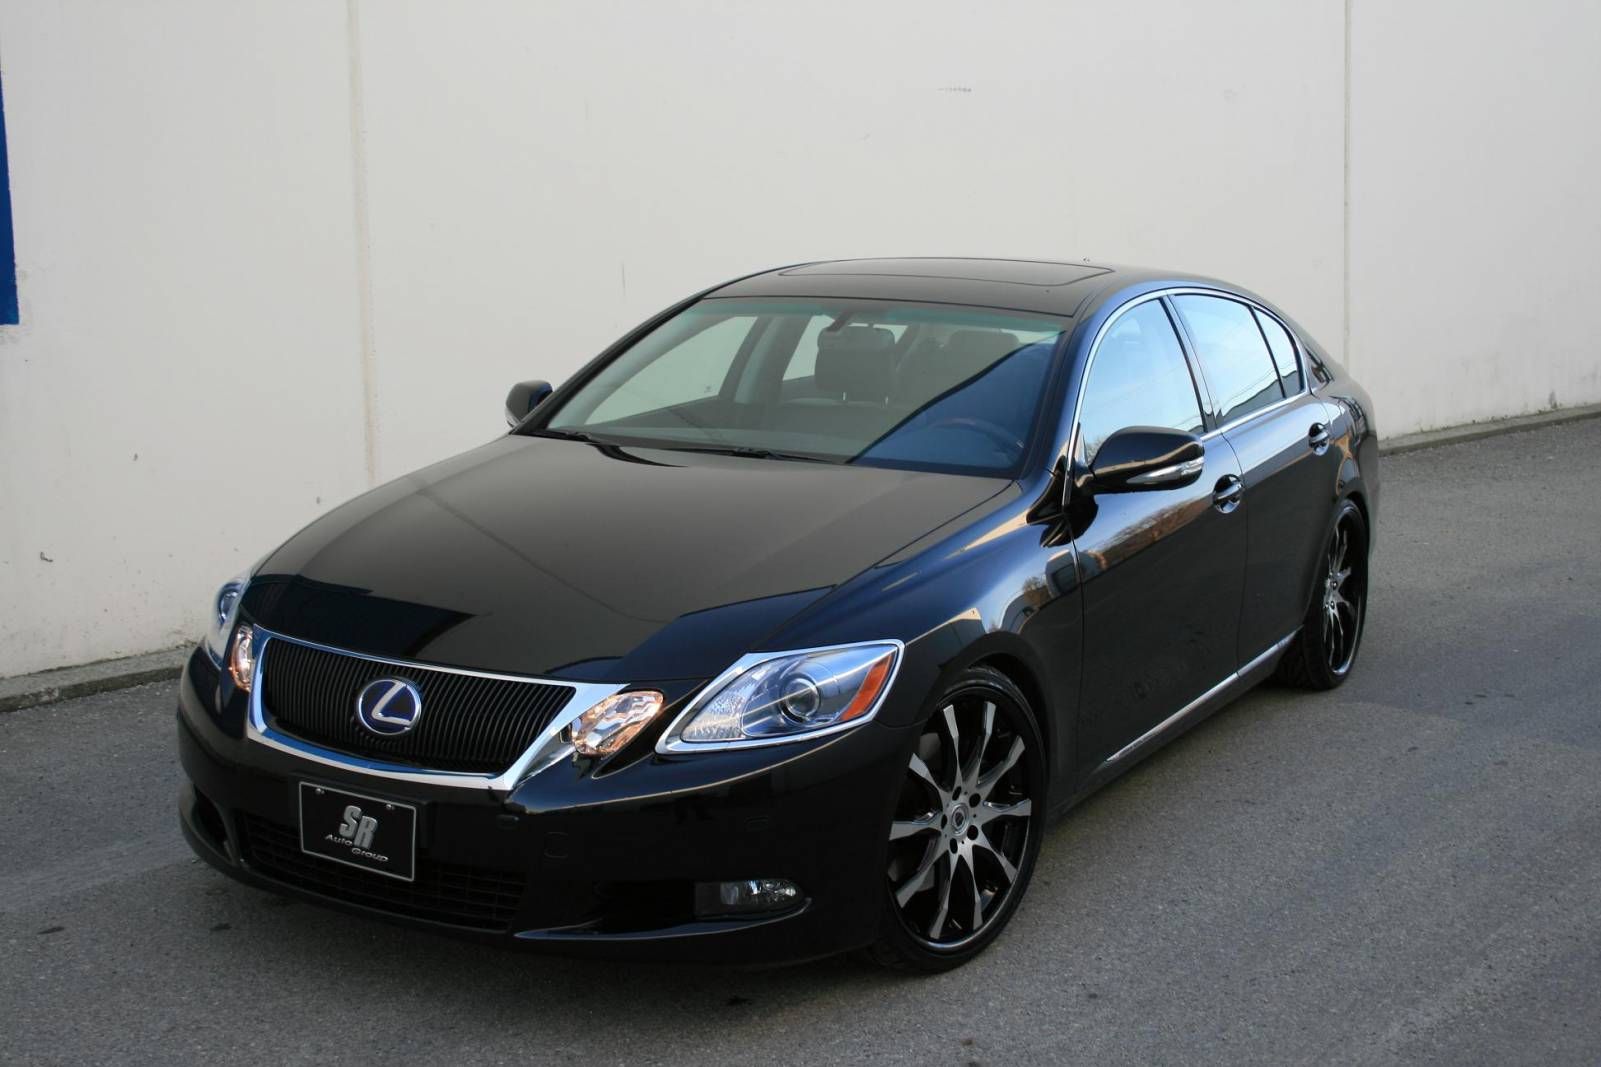 10 Lexus Gs 350 Awd 0 60 Times Top Speed Specs Quarter Mile And Wallpapers Mycarspecs United States Usa